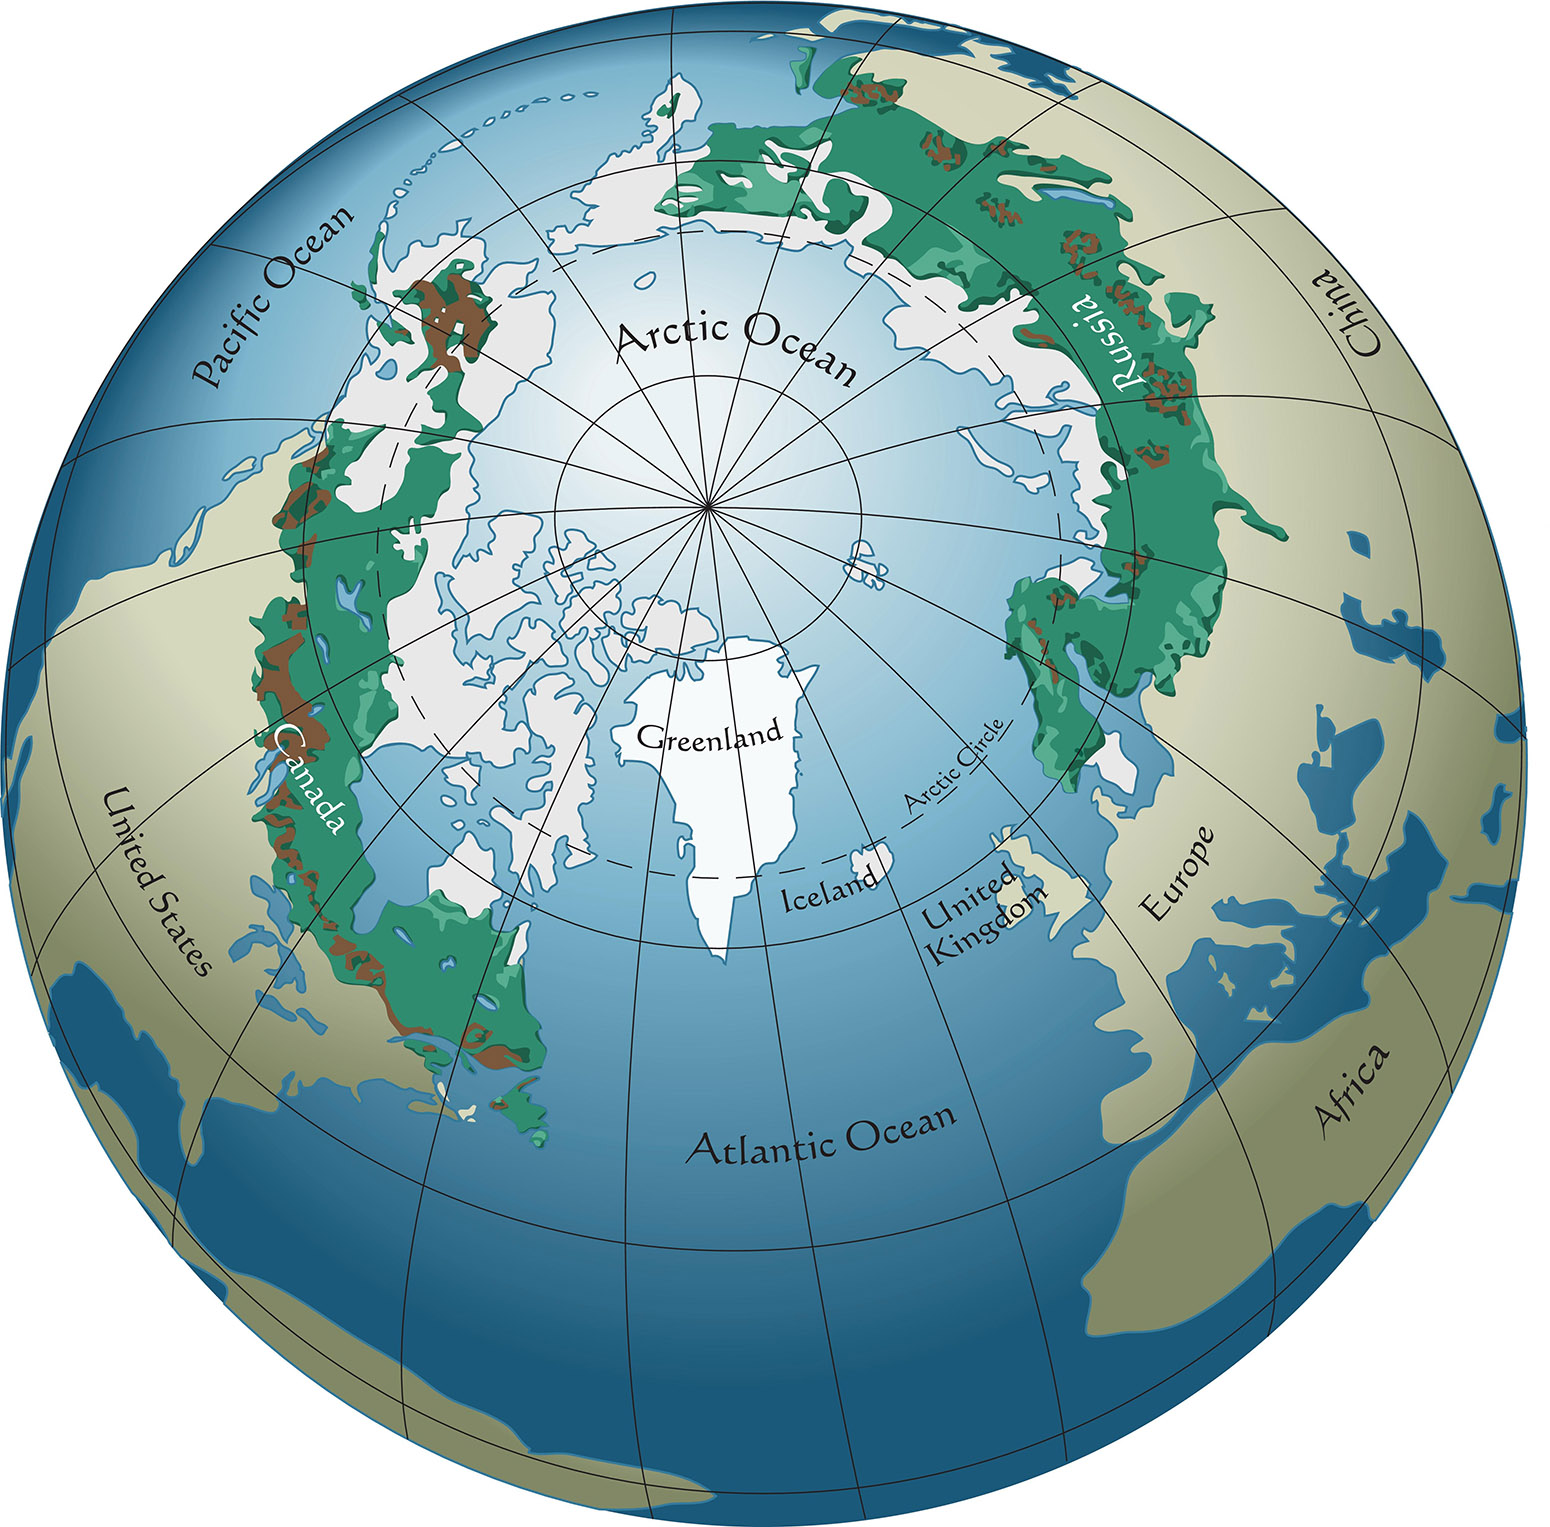 A world map showing the locations of boreal forests. Credit: aroderick / Alamy Stock Vector. W80GDJ